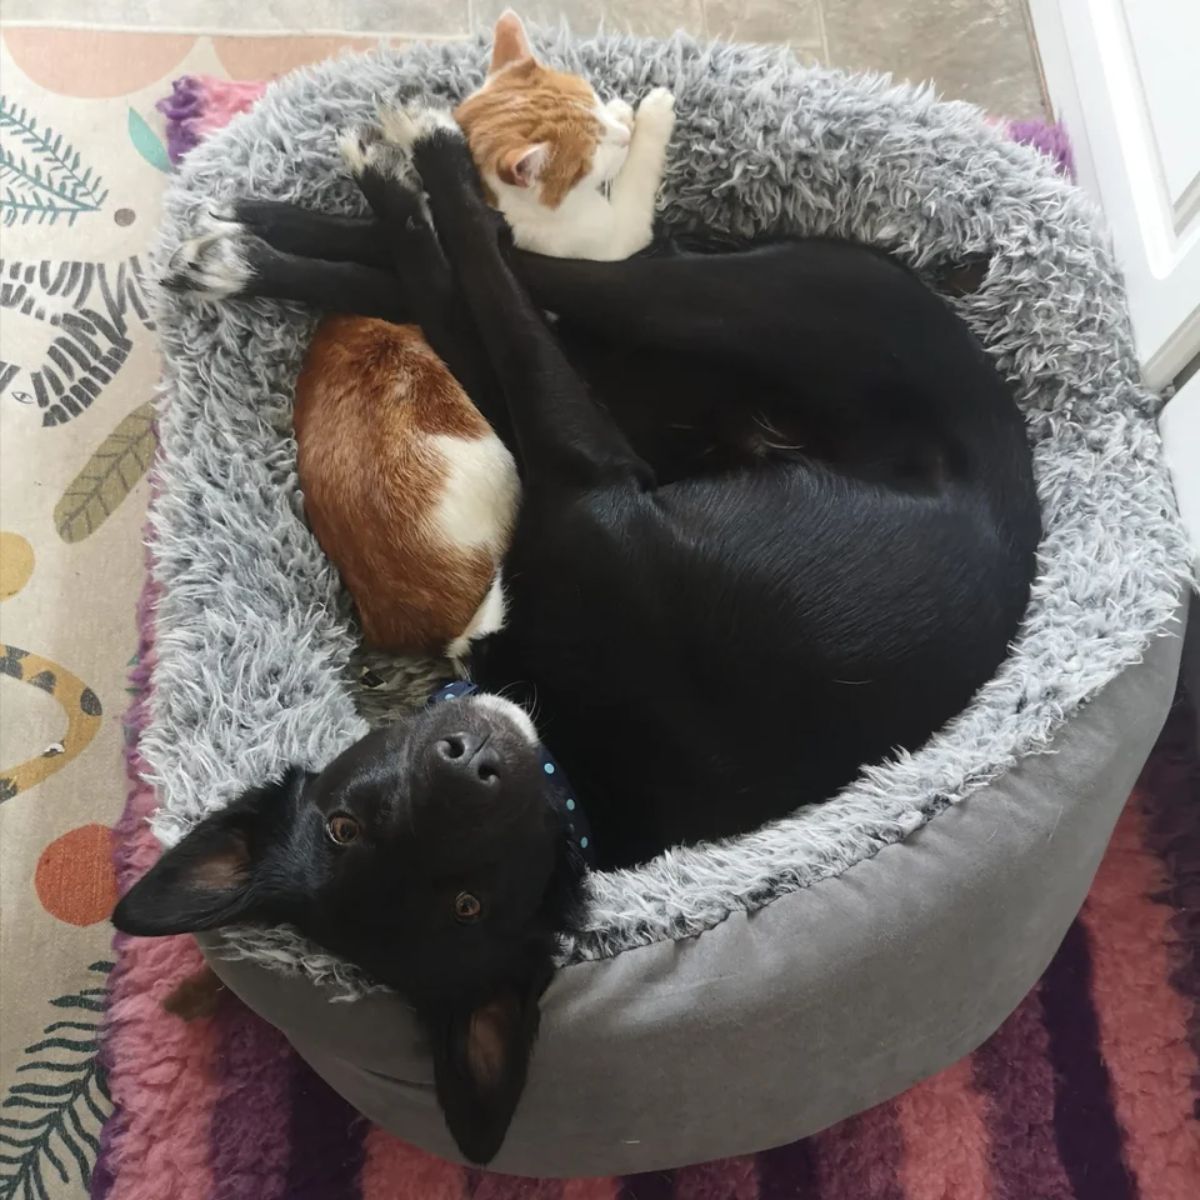 orange and white cat sleeping in a fluffy grey dog bed cuddling with a black and white dog